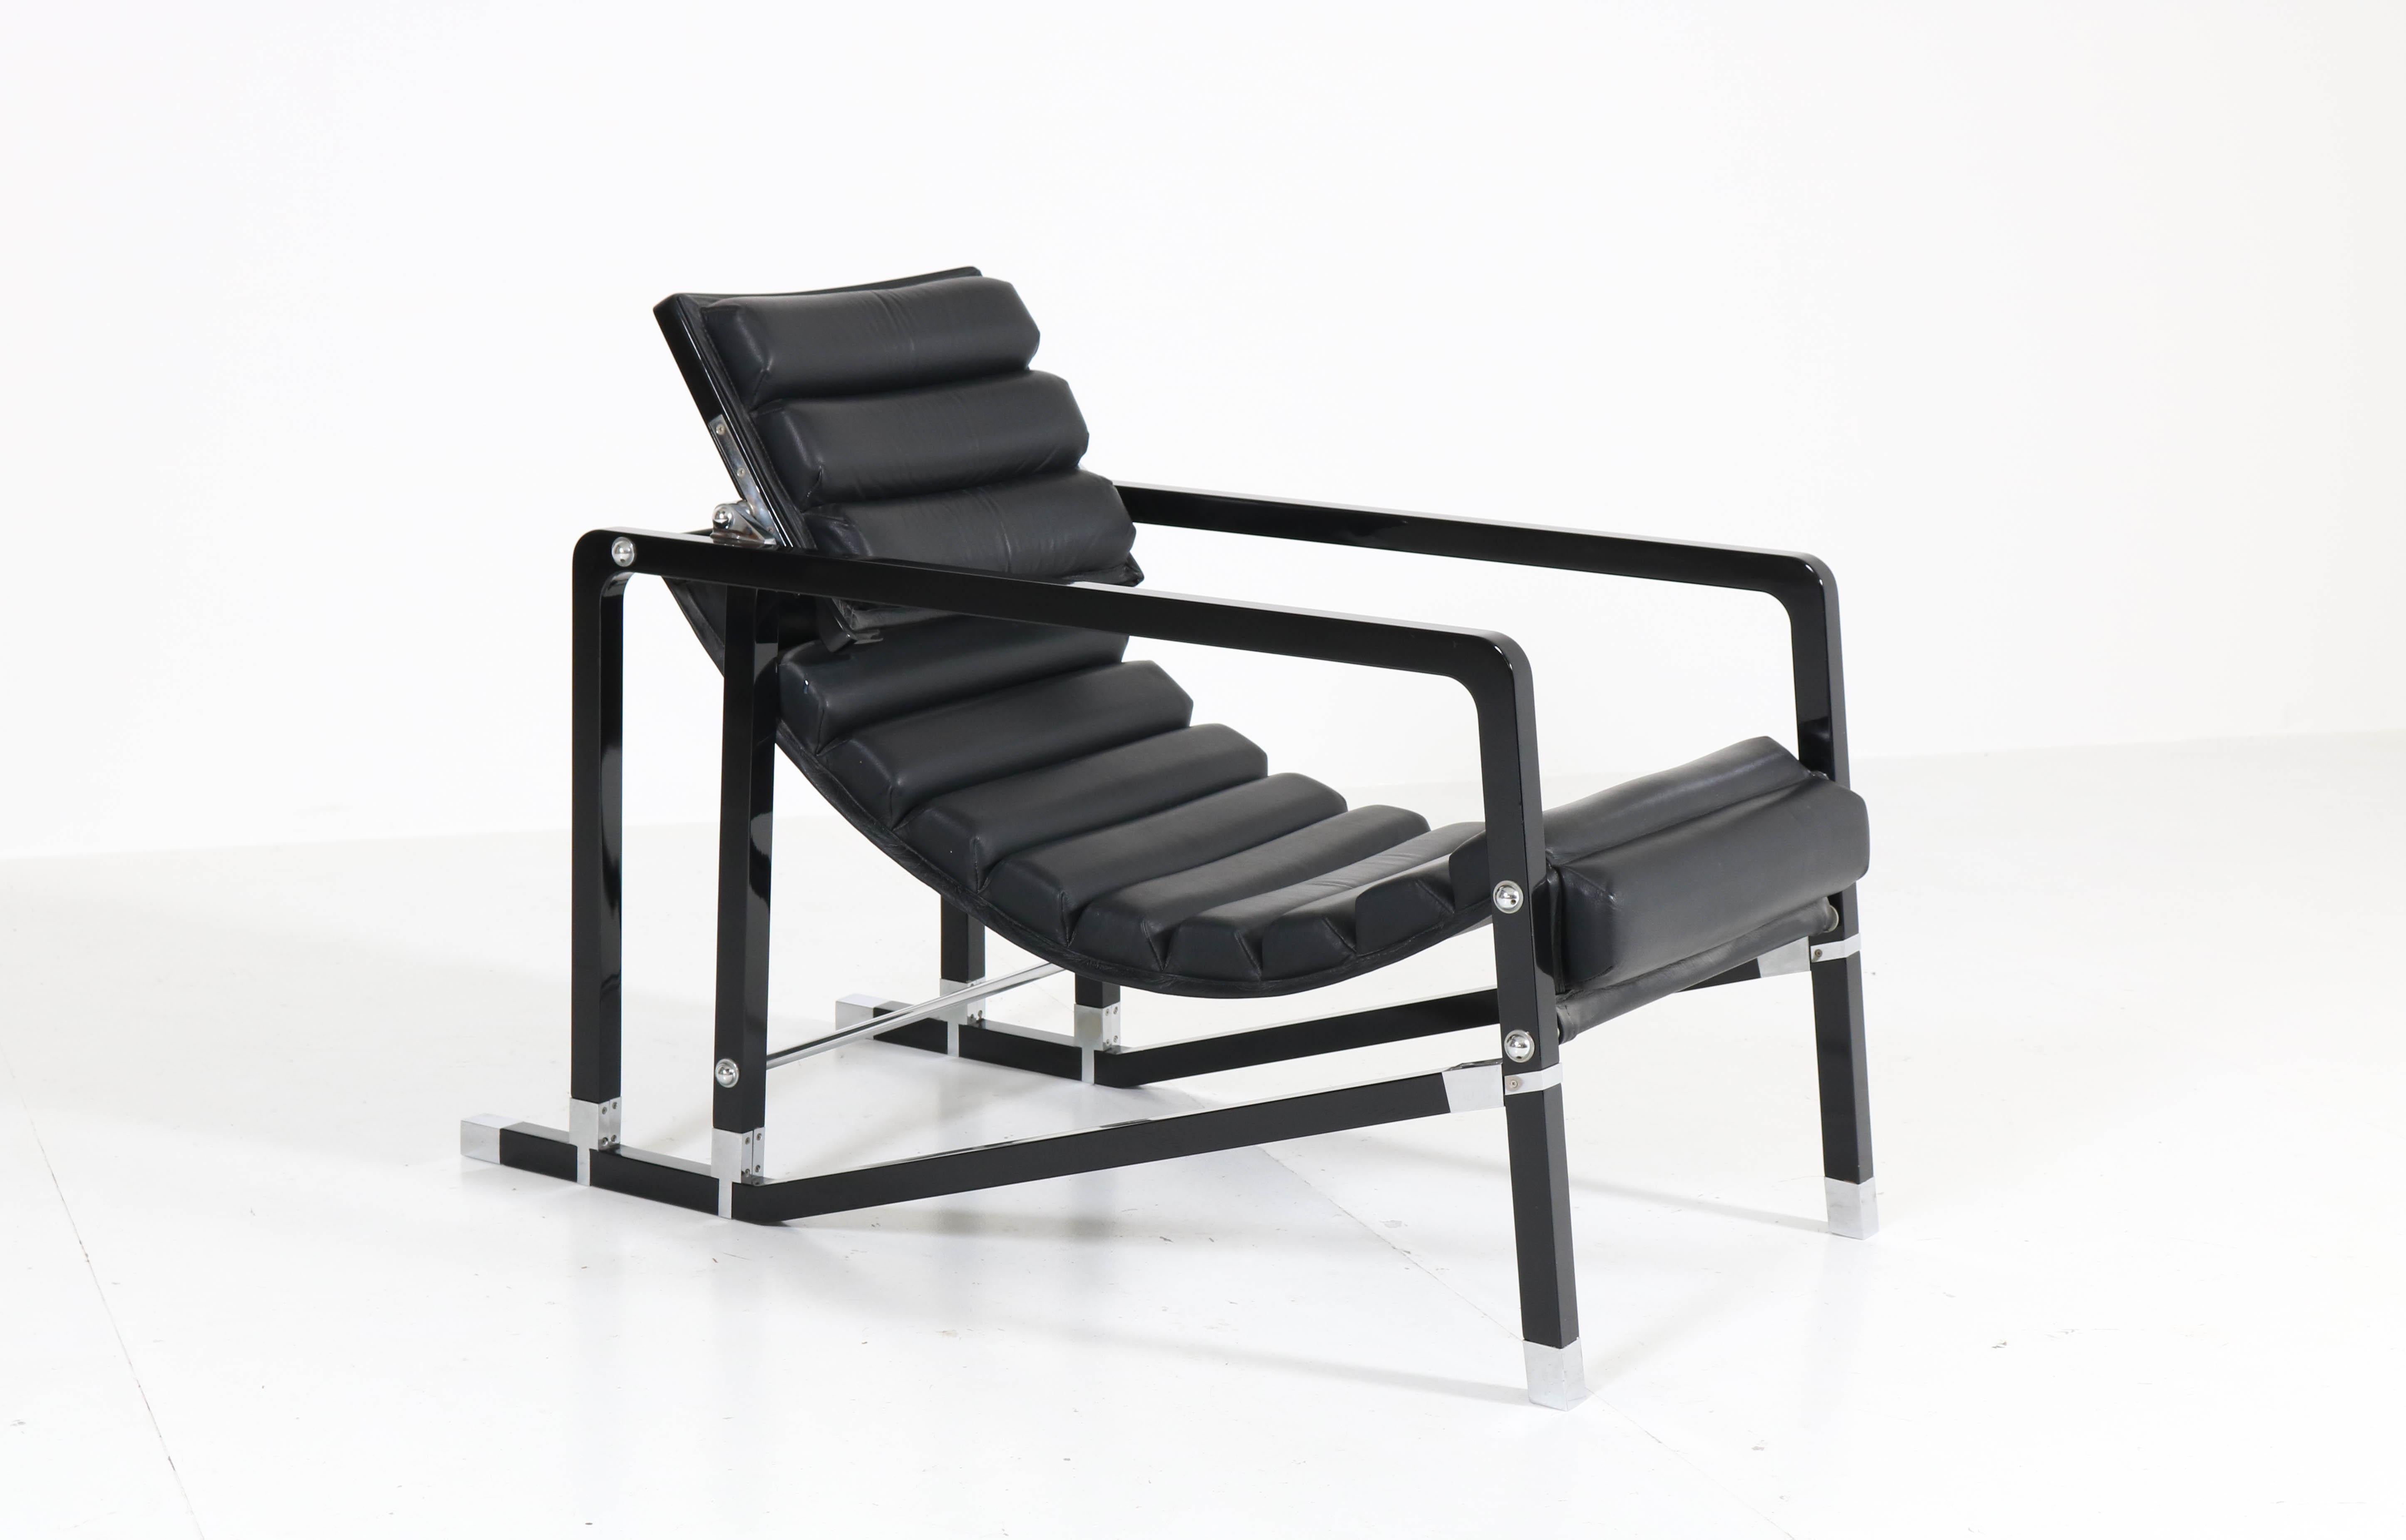 Wonderful Art Deco lounge chair.
Design by Eileen Gray.
Manufactured by Ecart International, 1980s.
This chair was designed for use on the terrace of Eileen's villa E 1027 at
Roquebrune cap Martin between 1925 and 1927.
Black lacquered beech